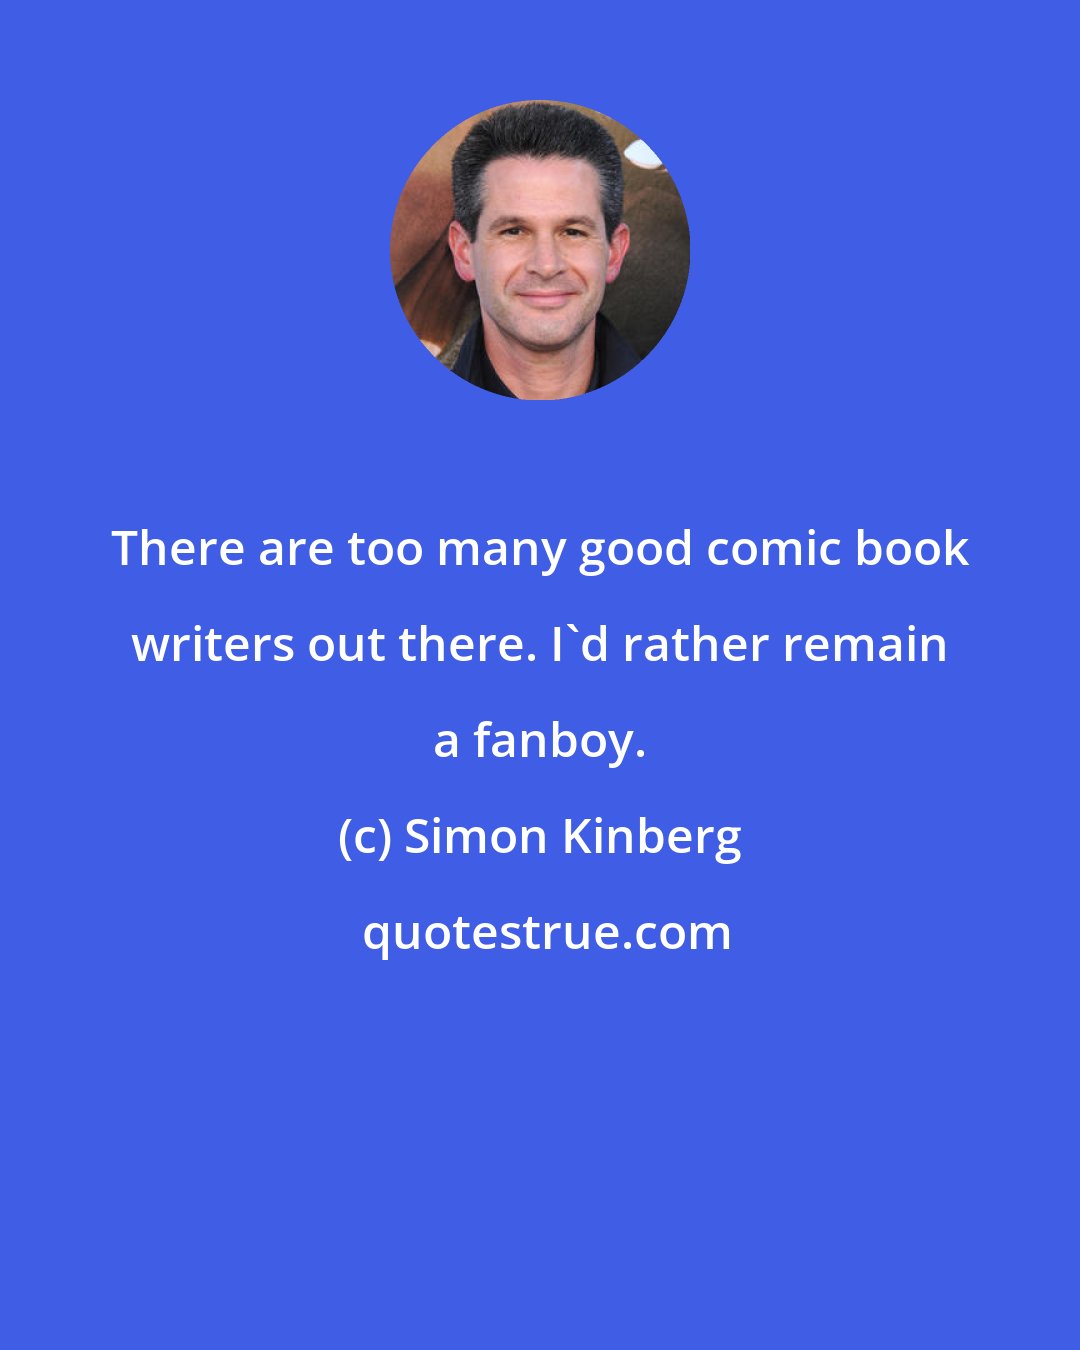 Simon Kinberg: There are too many good comic book writers out there. I'd rather remain a fanboy.